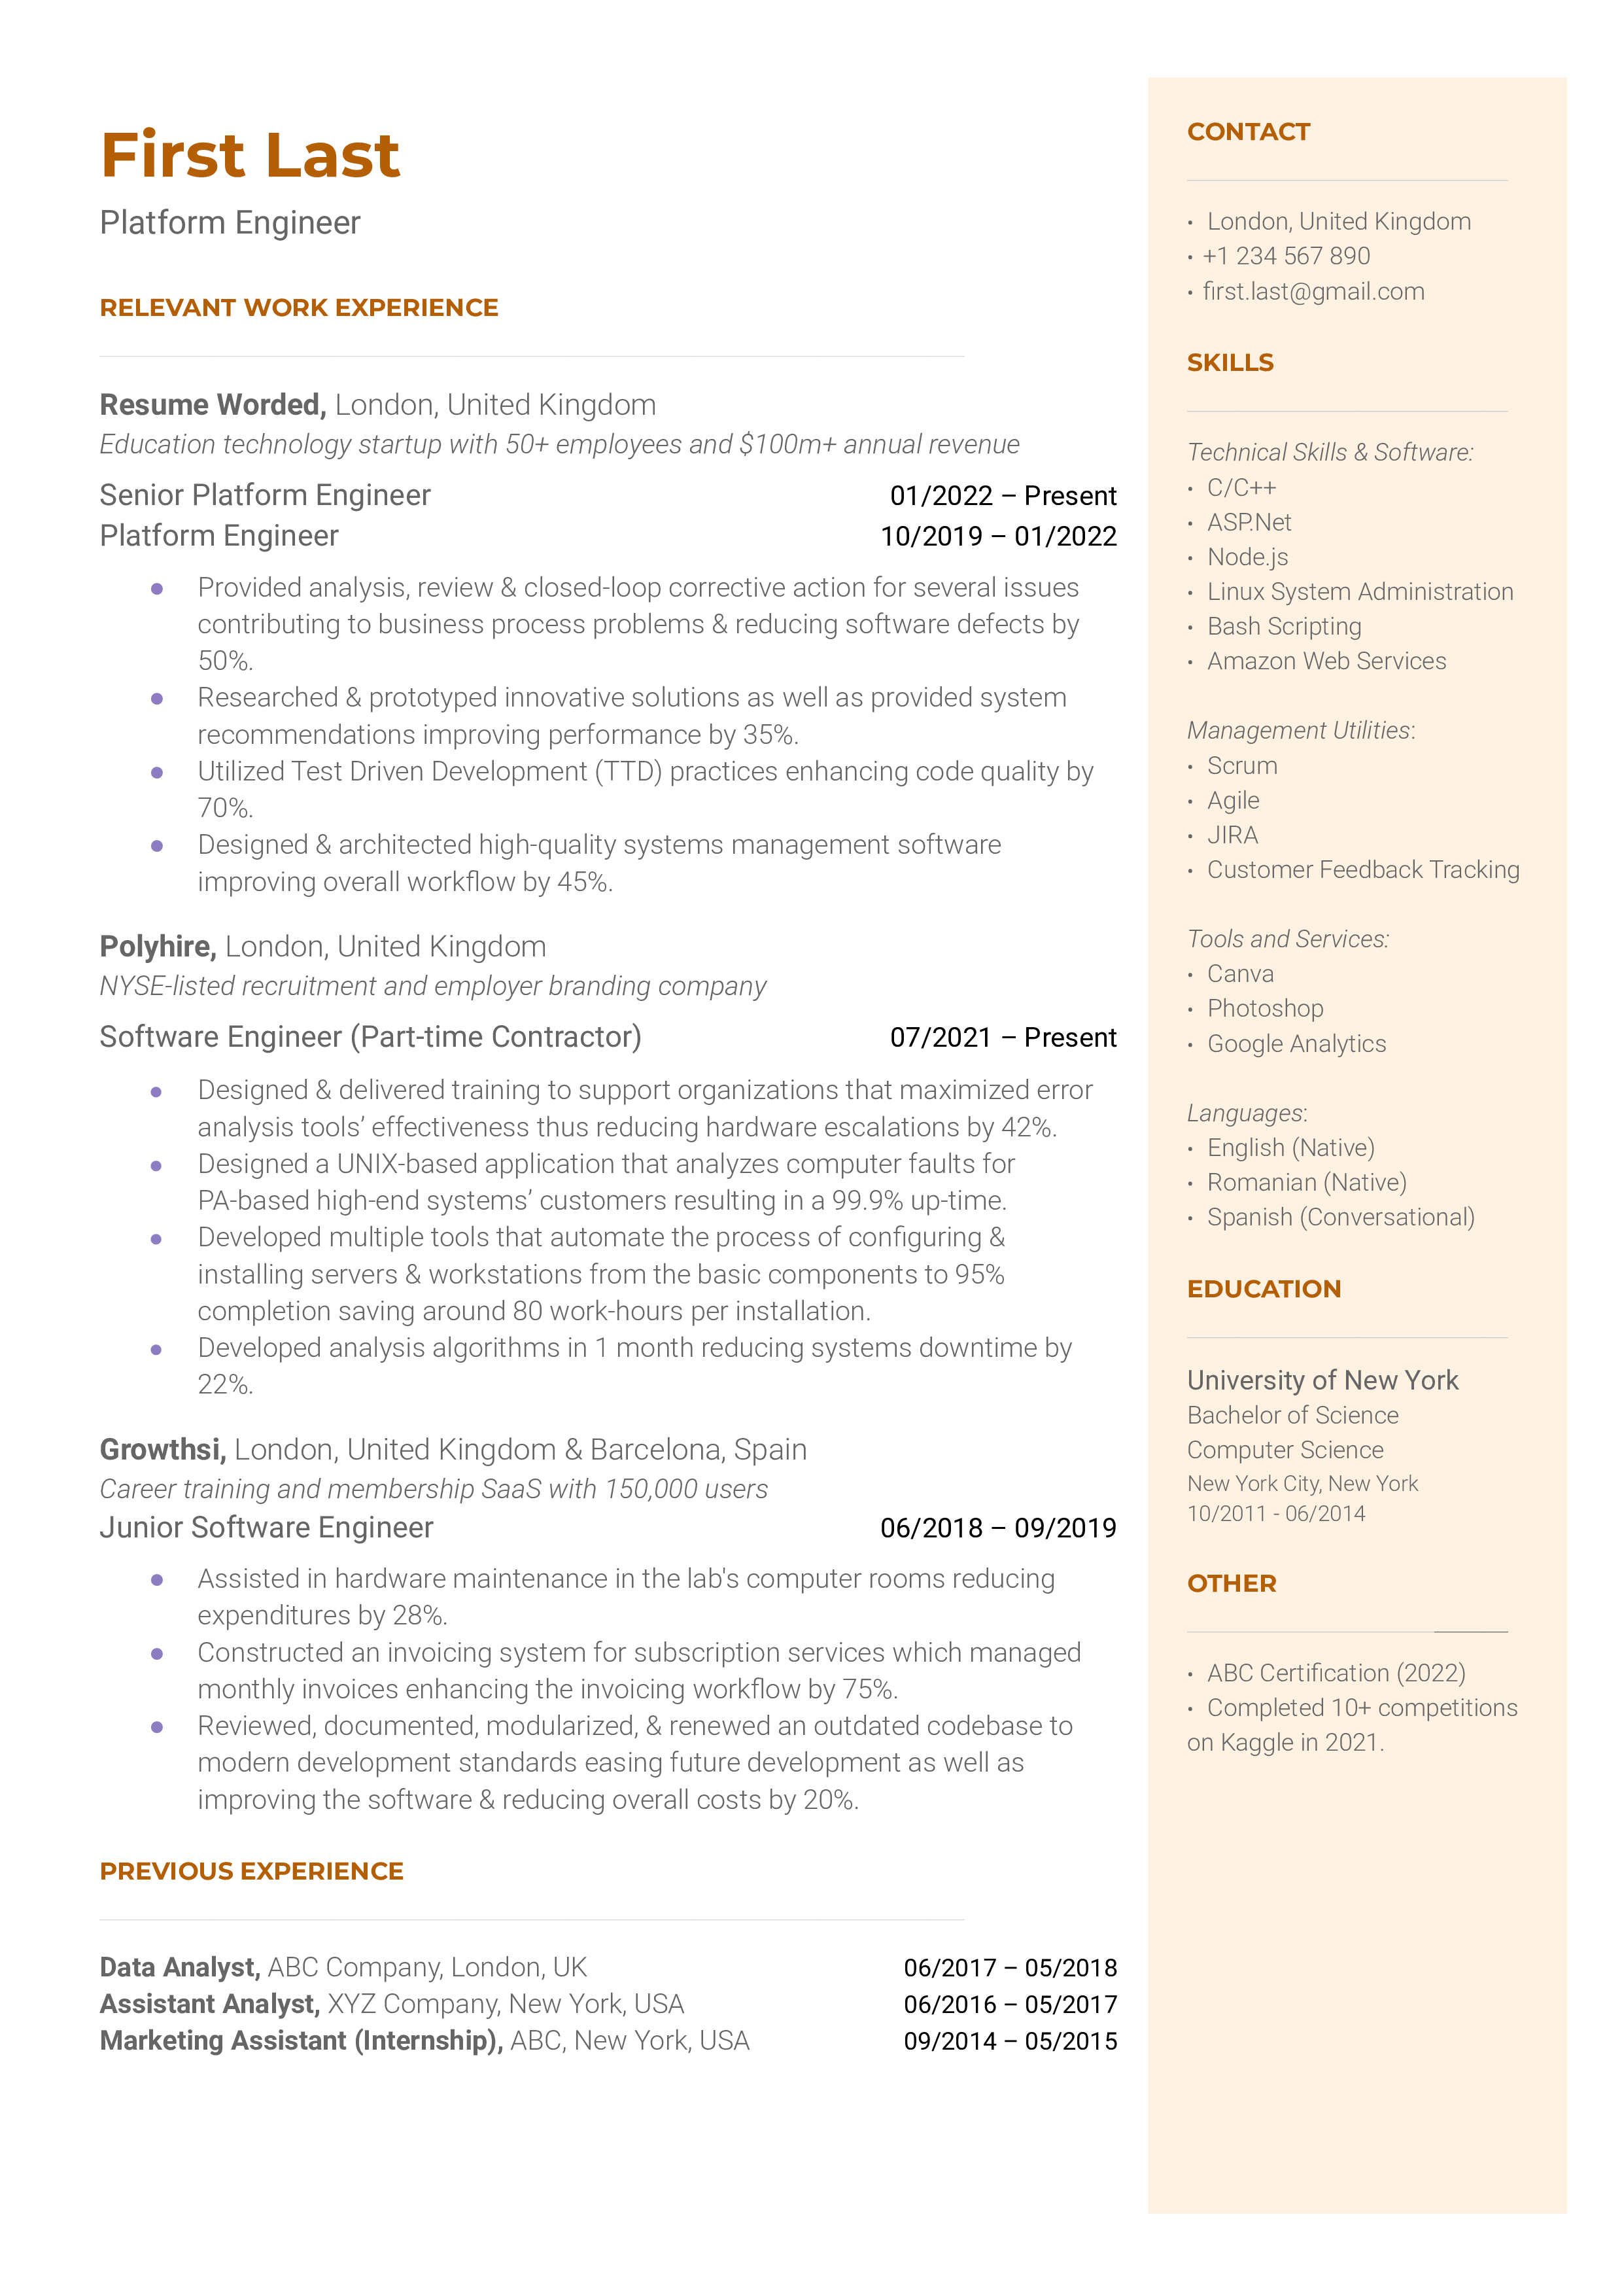 A well-structured CV for a Platform Engineer role featuring past platforms managed and technical skills.